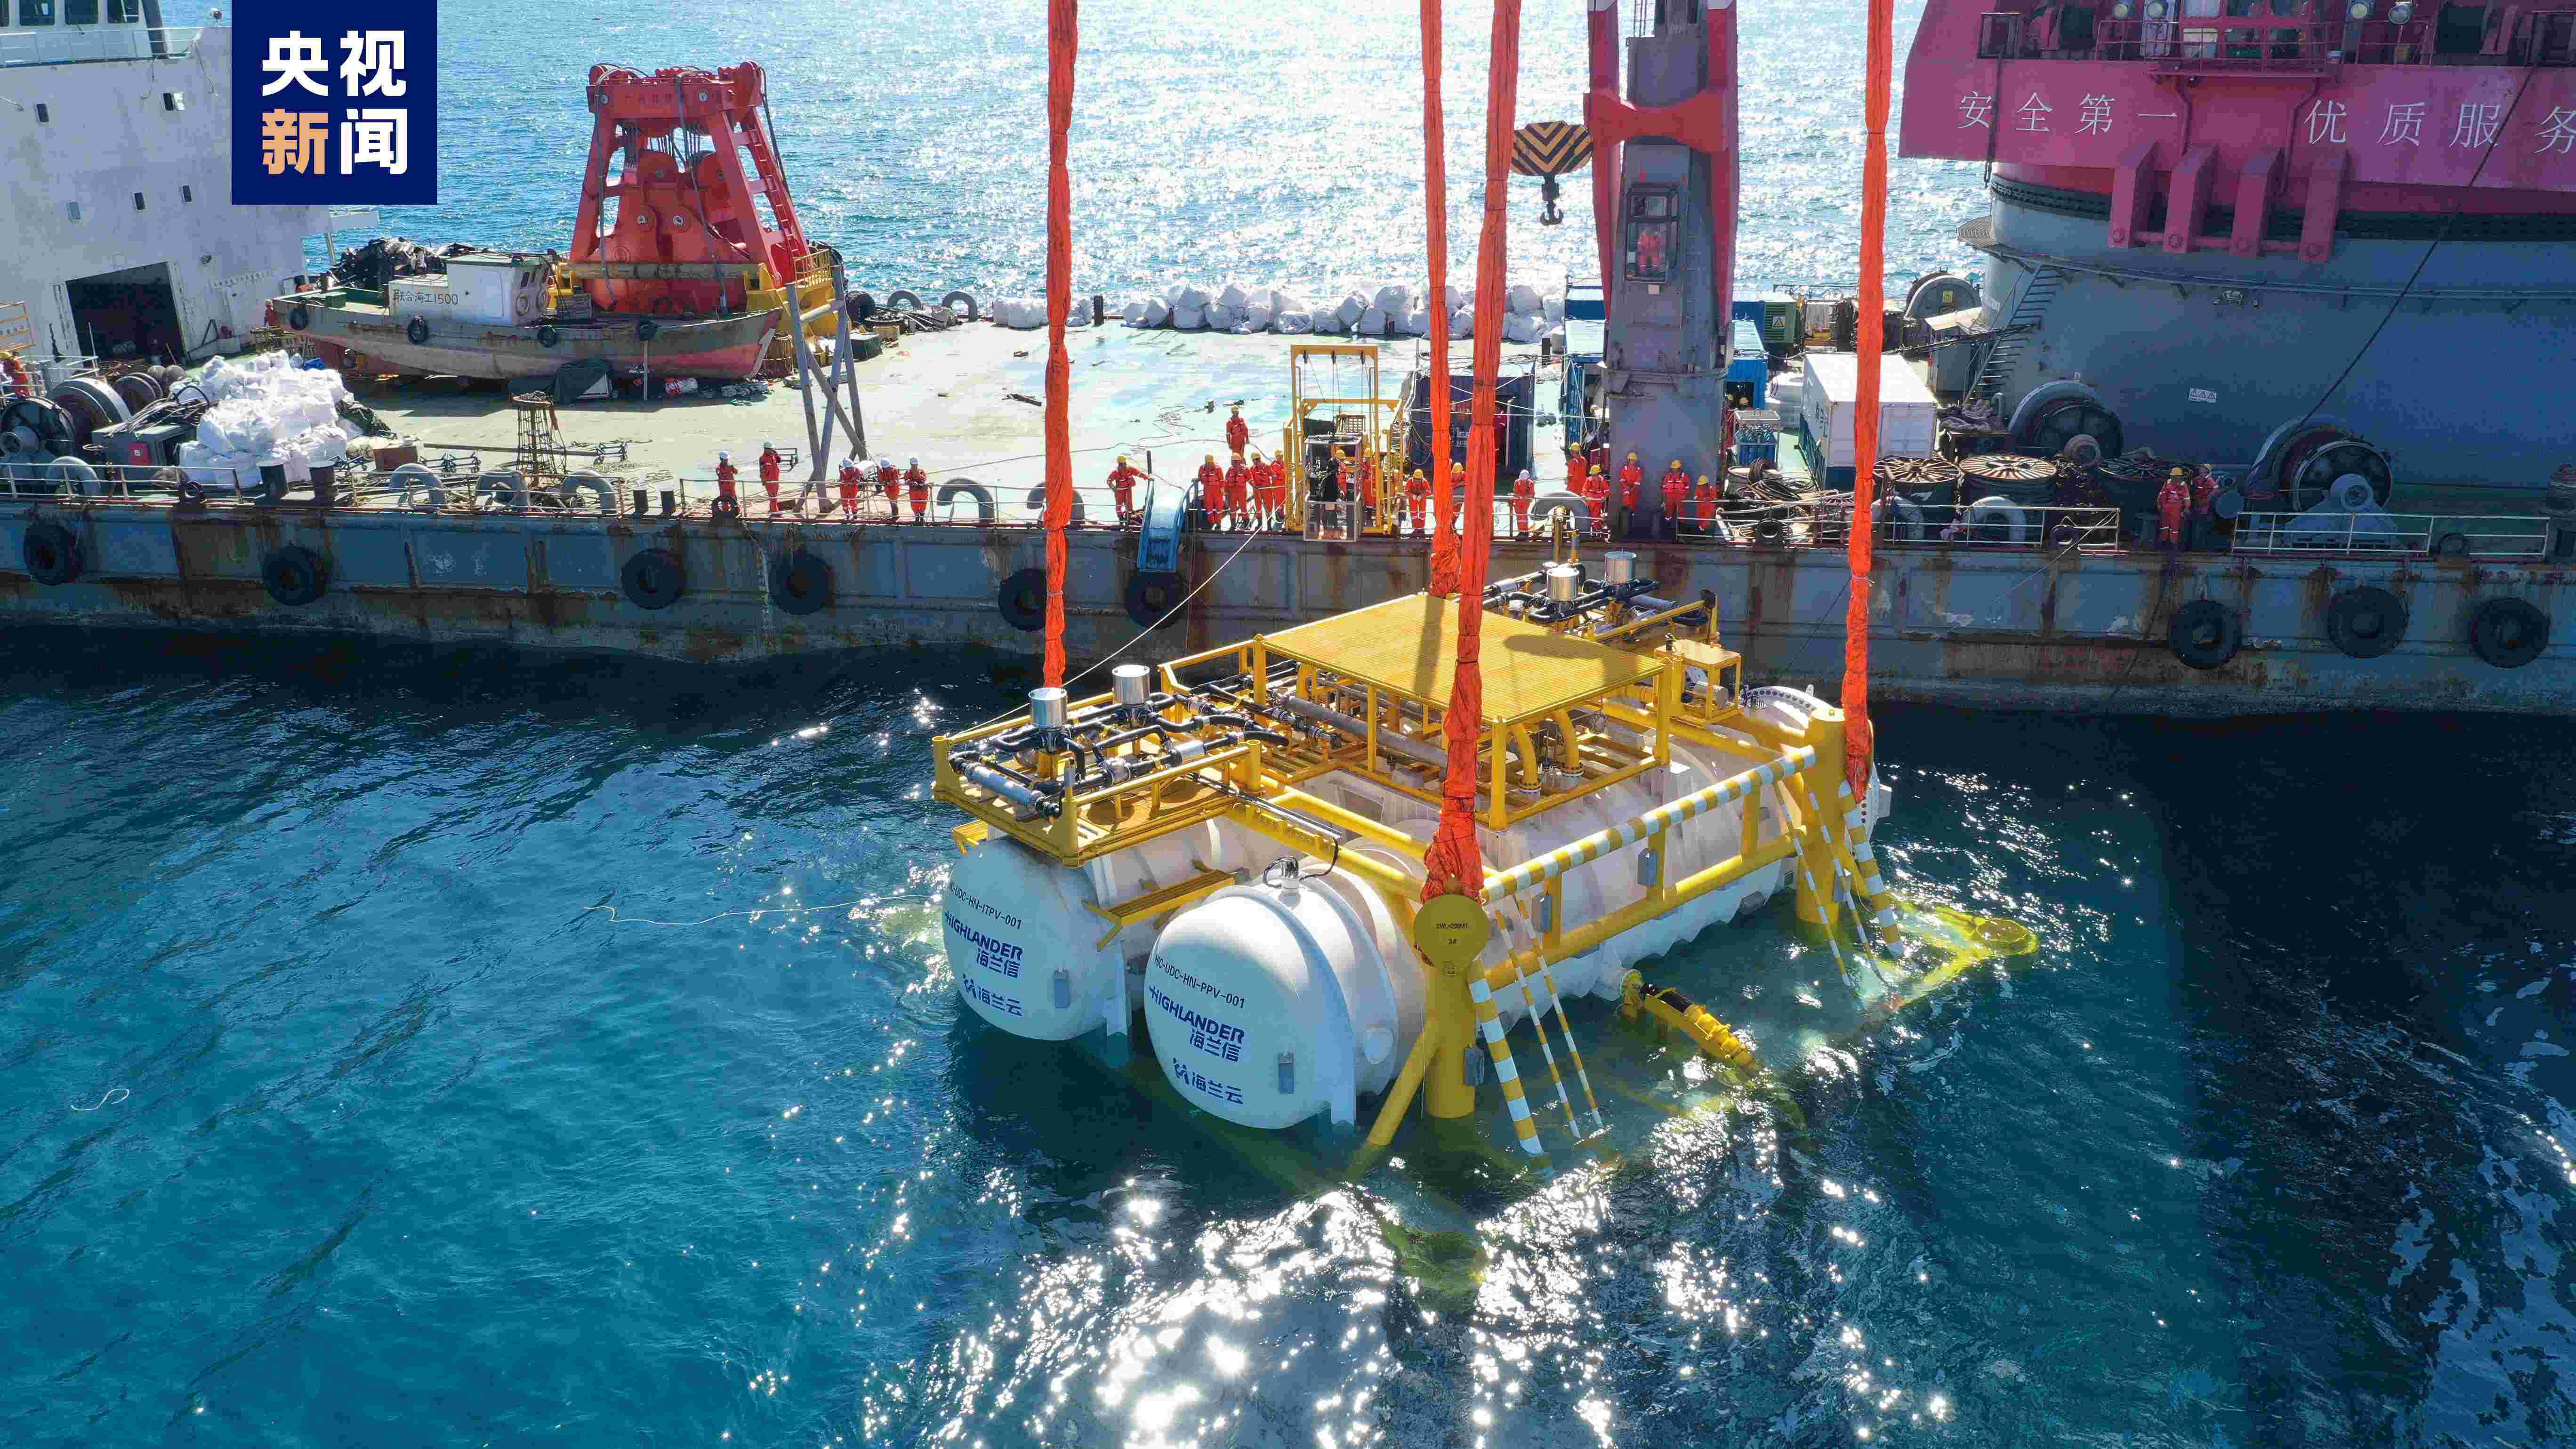 The first cabin of China's commercial undersea data center launched in Lingshui Li Autonomous County, south China's Hainan Province, March 31, 2023. /China Media Group